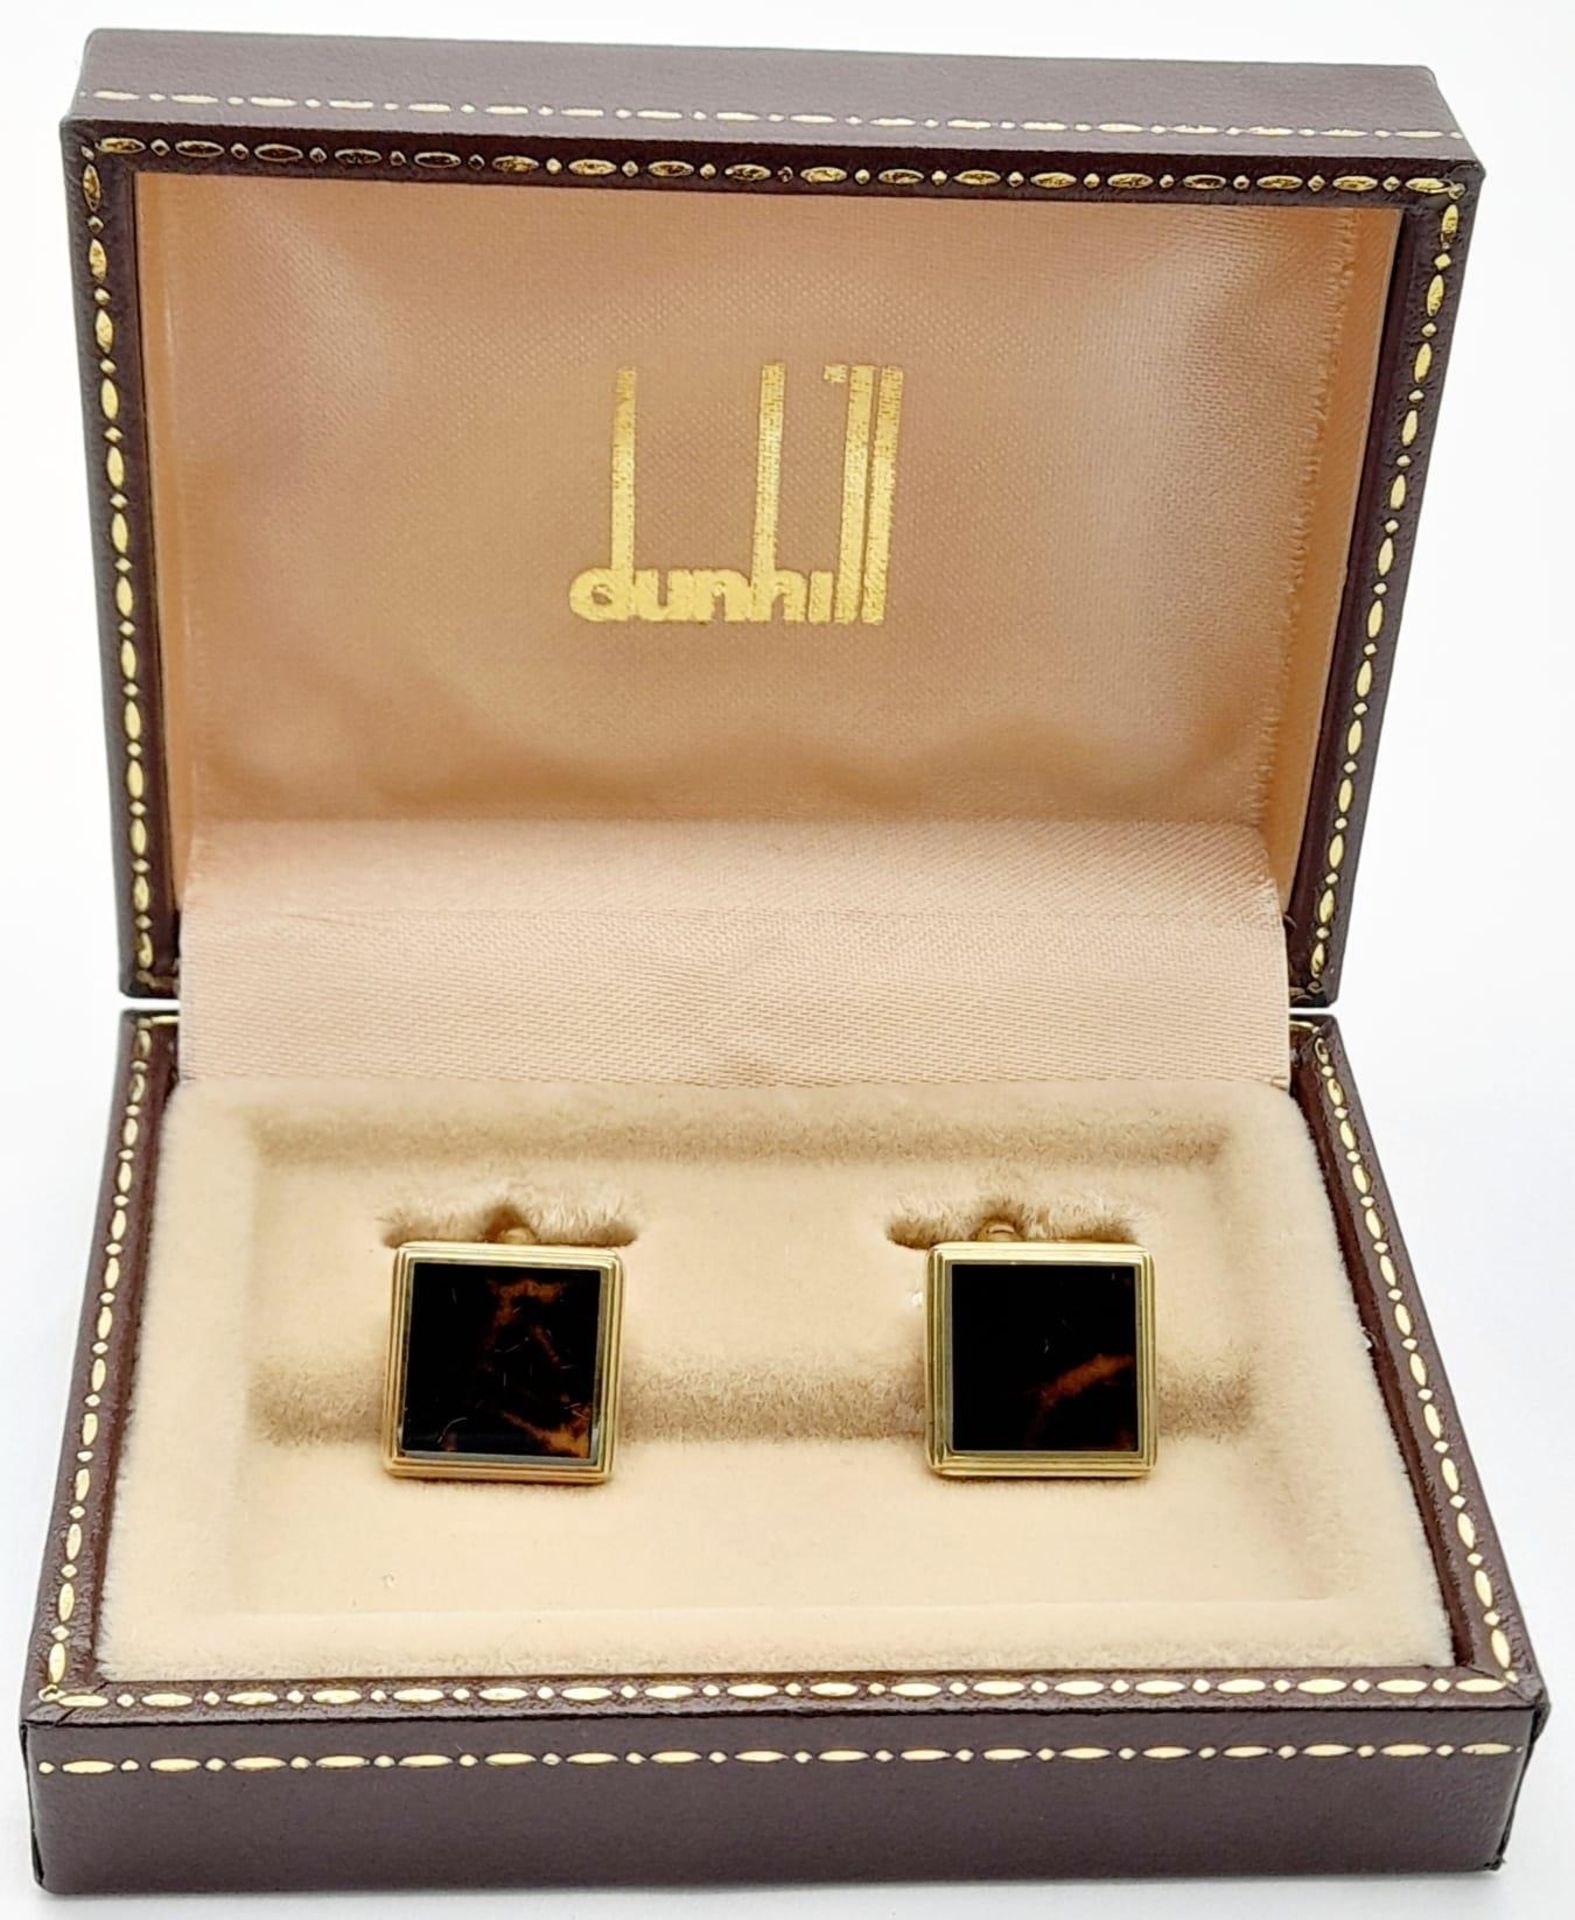 An Excellent Condition Pair of Square Yellow Gold Gilt Tortoiseshell Cufflinks by Dunhill in their - Image 6 of 8